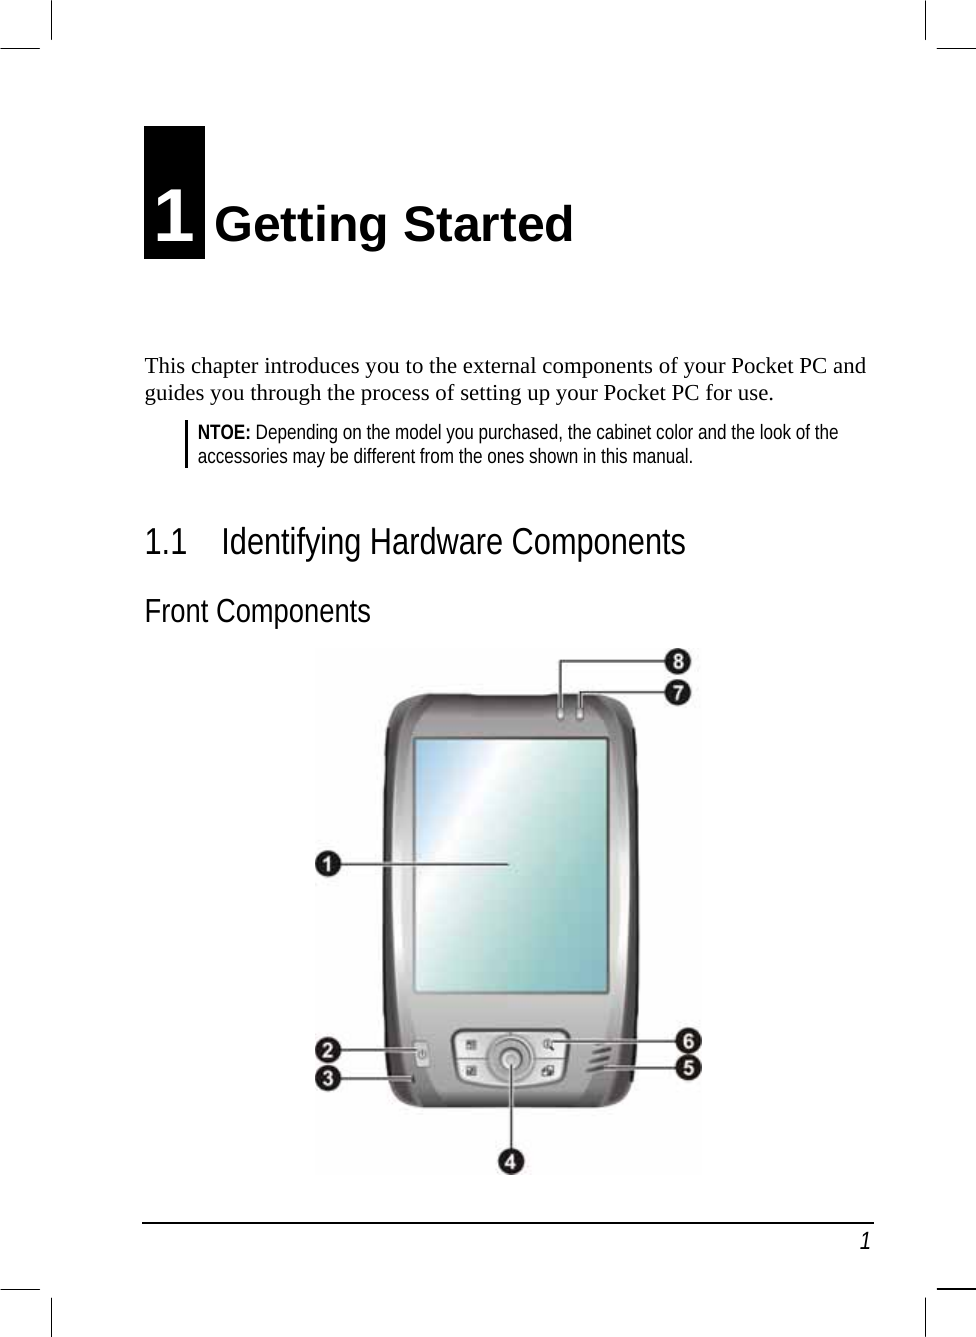   1 1 Getting Started This chapter introduces you to the external components of your Pocket PC and guides you through the process of setting up your Pocket PC for use. NTOE: Depending on the model you purchased, the cabinet color and the look of the accessories may be different from the ones shown in this manual.  1.1  Identifying Hardware Components Front Components  